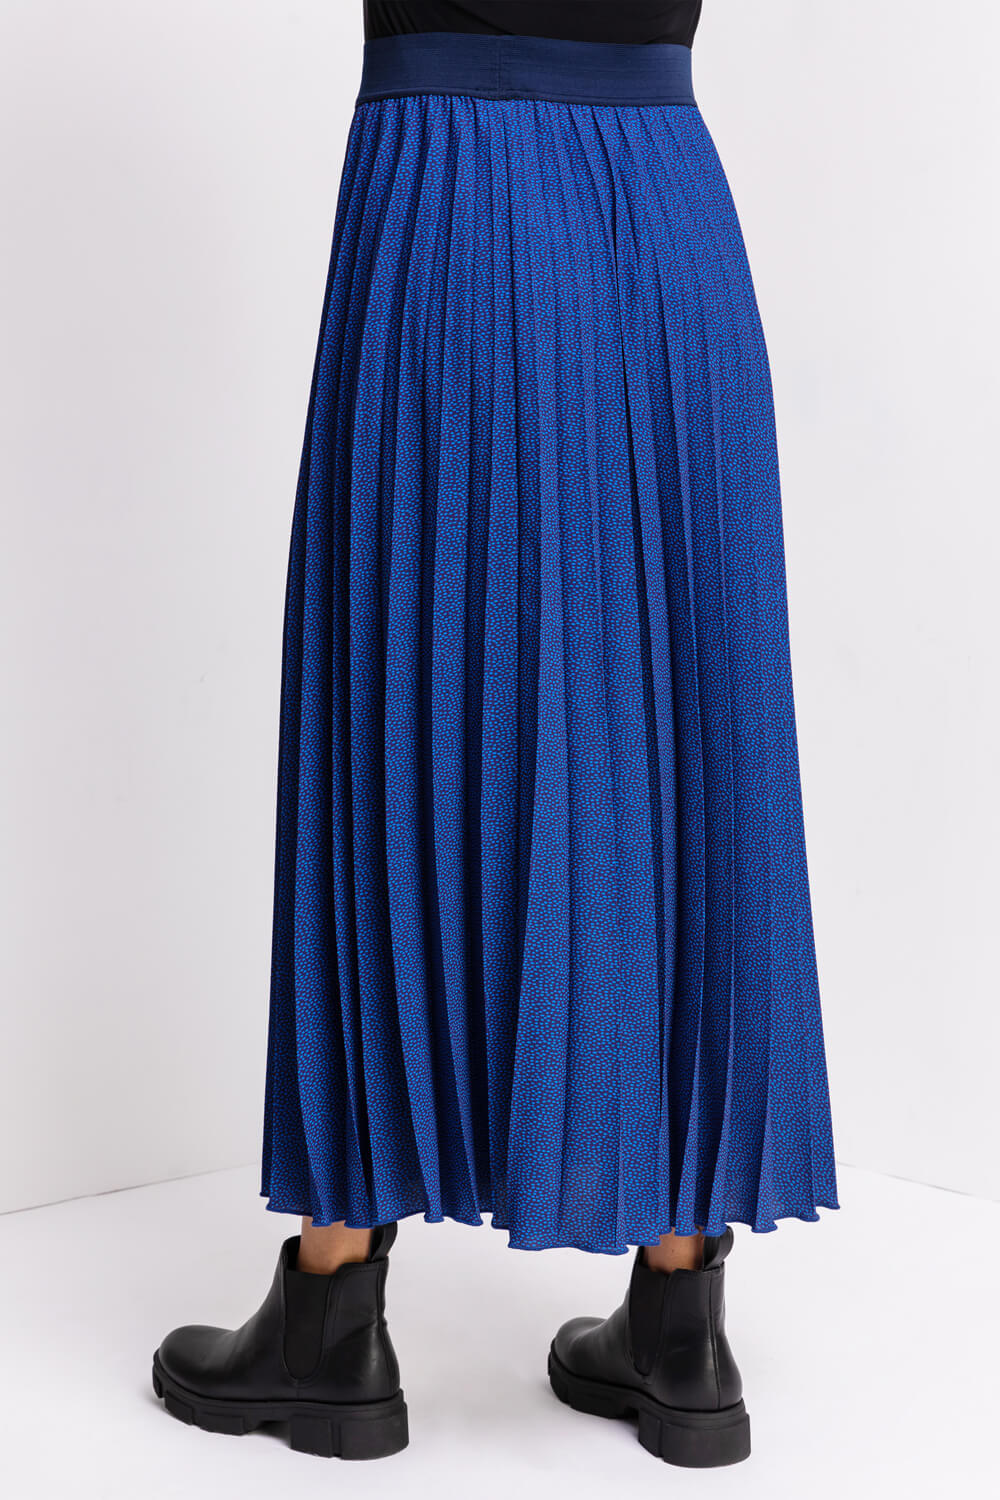 Midnight Blue Ditsy Spot Pleated Maxi Skirt, Image 2 of 5